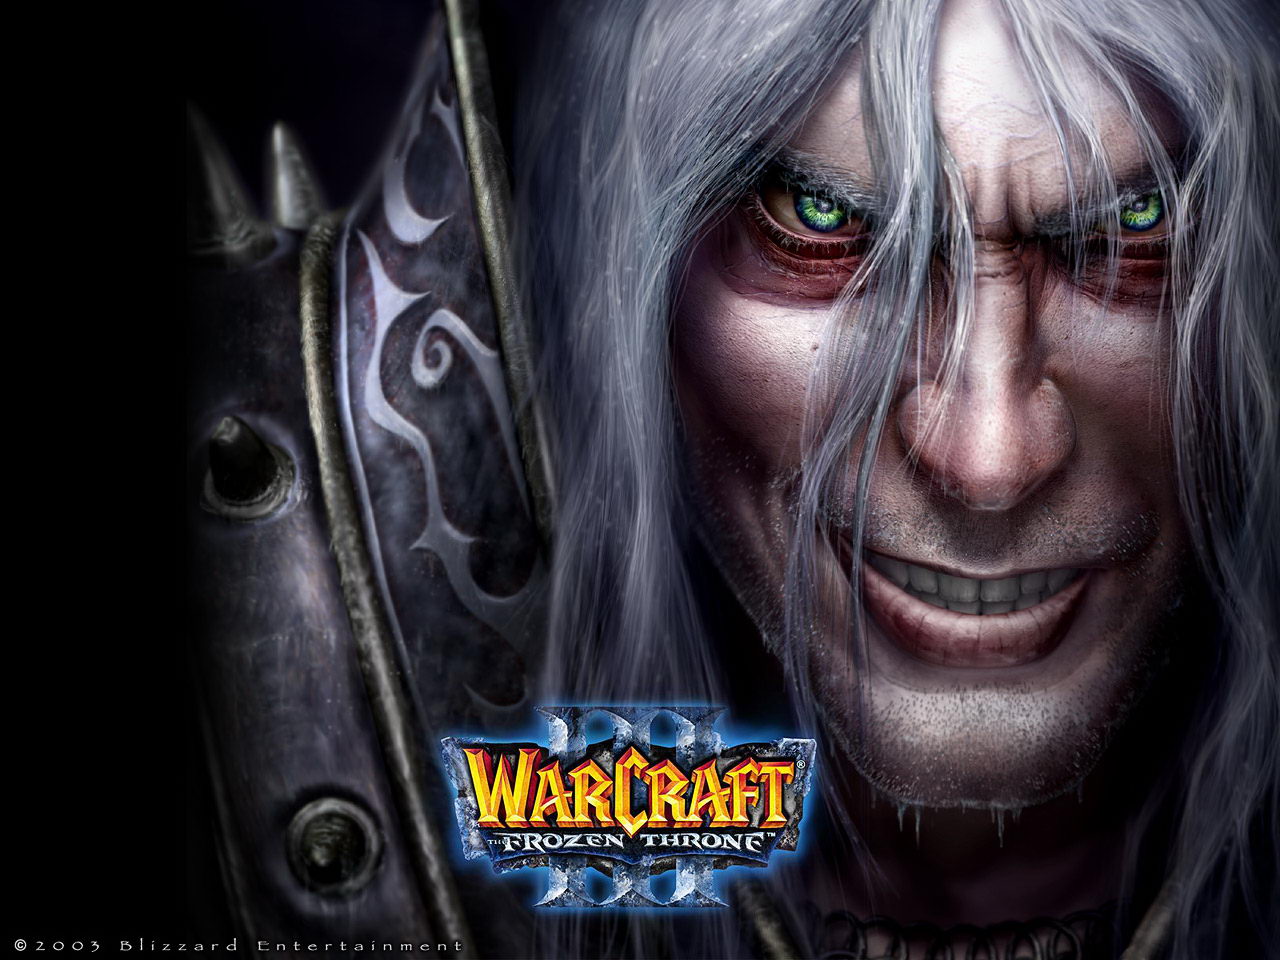 warcraft 3 frozen throne co op campaign